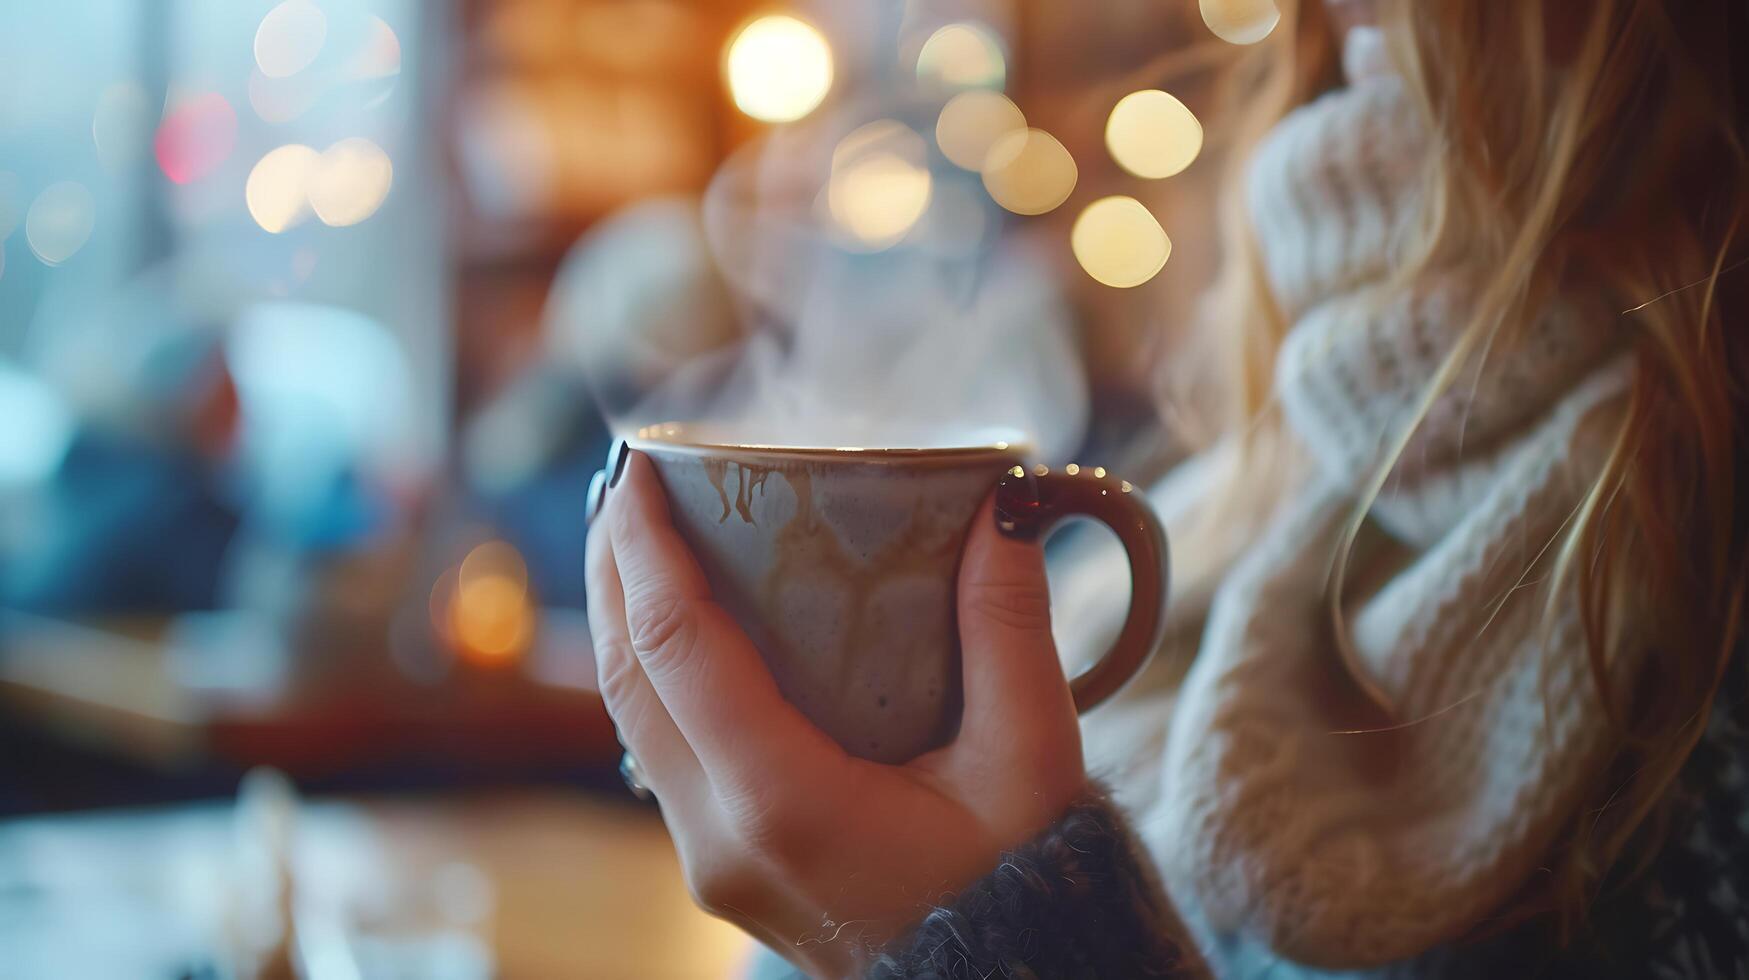 AI generated Steaming Coffee Cup Embraced by Womans Hand in Cozy Cafe Ambiance Captured with 50mm Lens photo